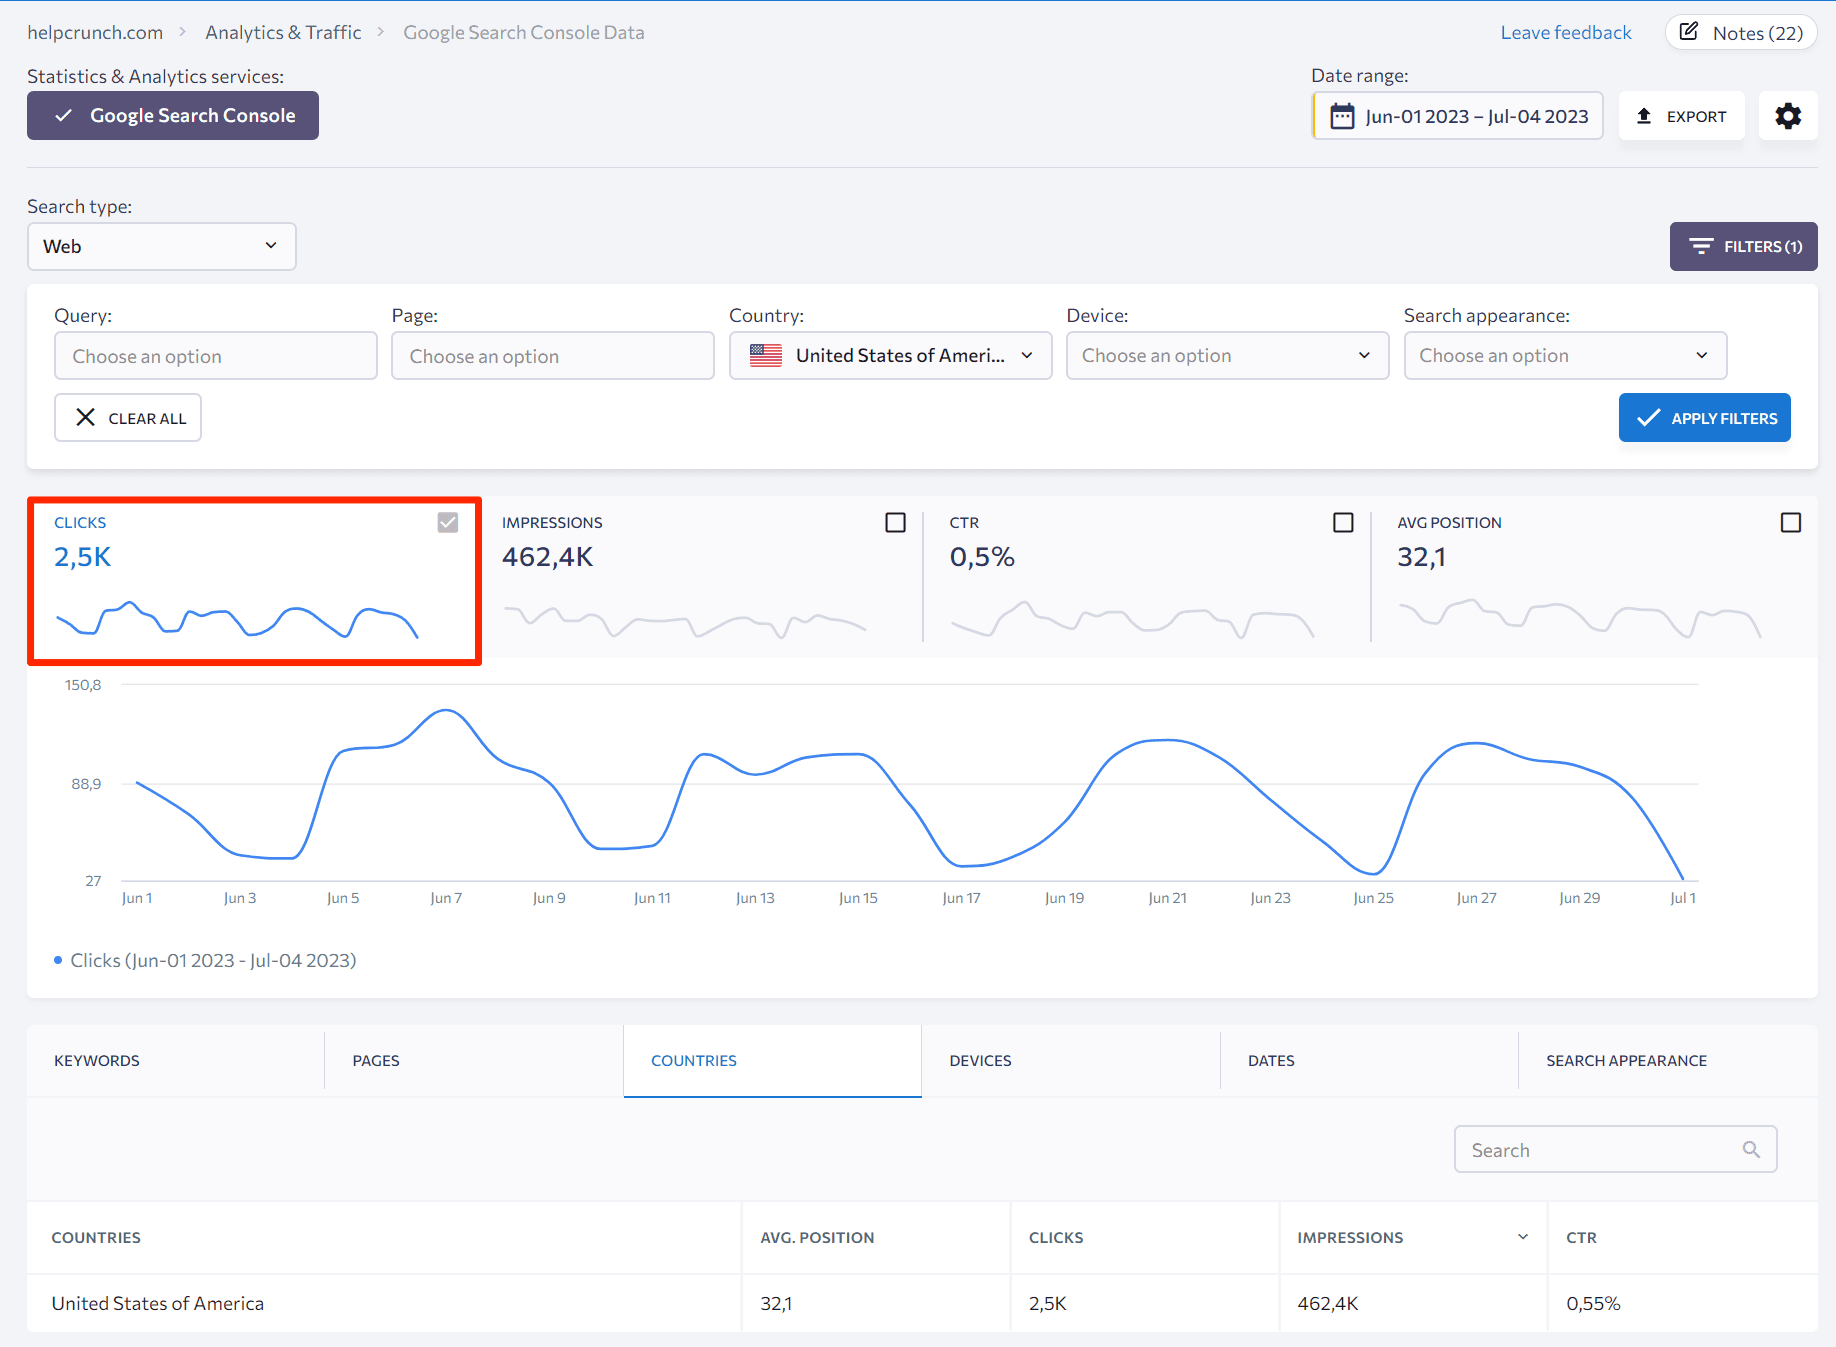 Organic traffic data from GSC